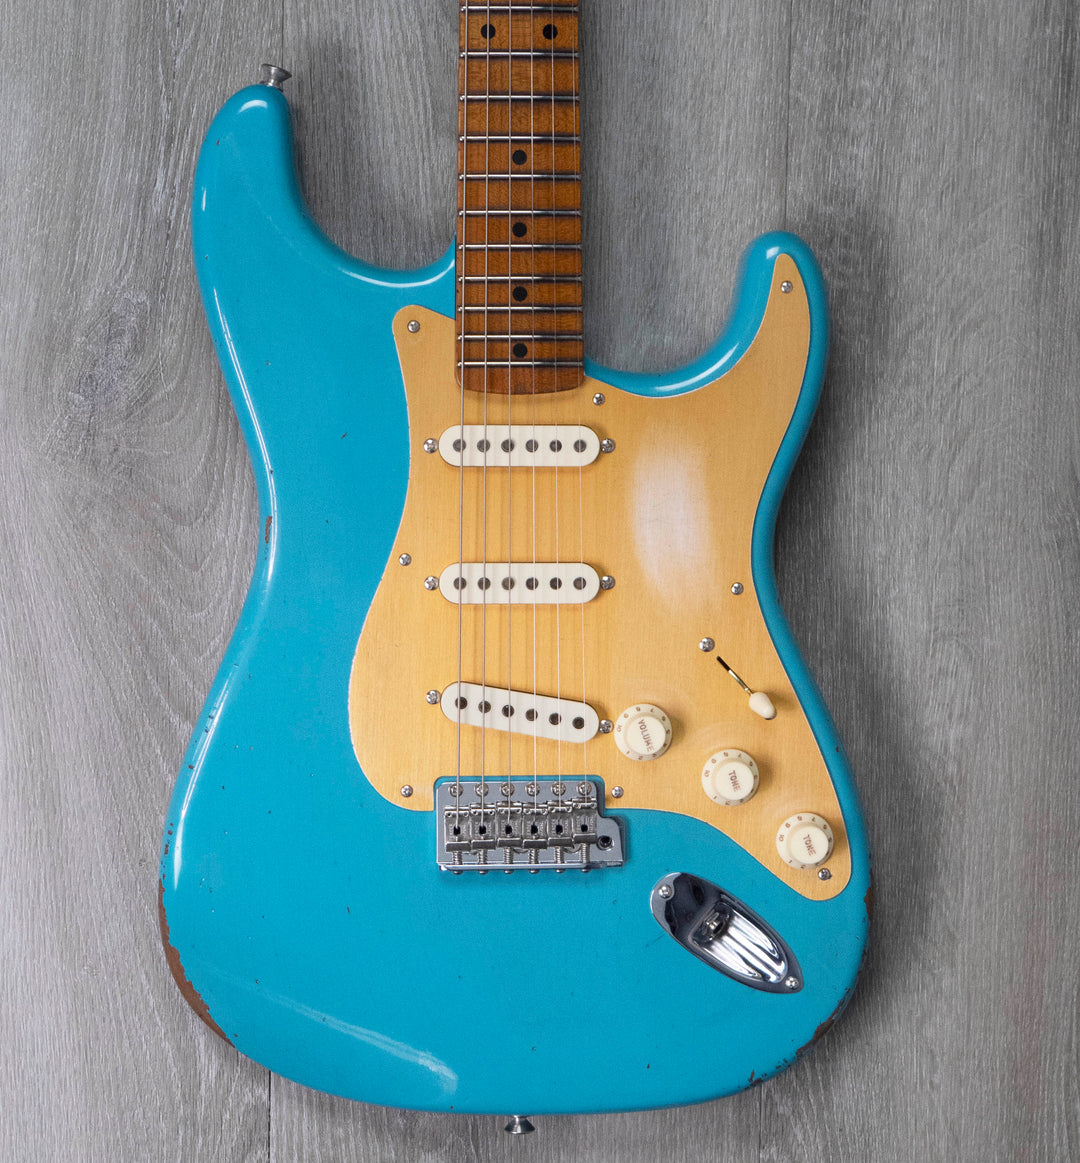 Fender Custom Shop Limited Edition Roasted '56 Stratocaster Relic, Closet Classic Hardware, Faded Aged Taos Turquoise